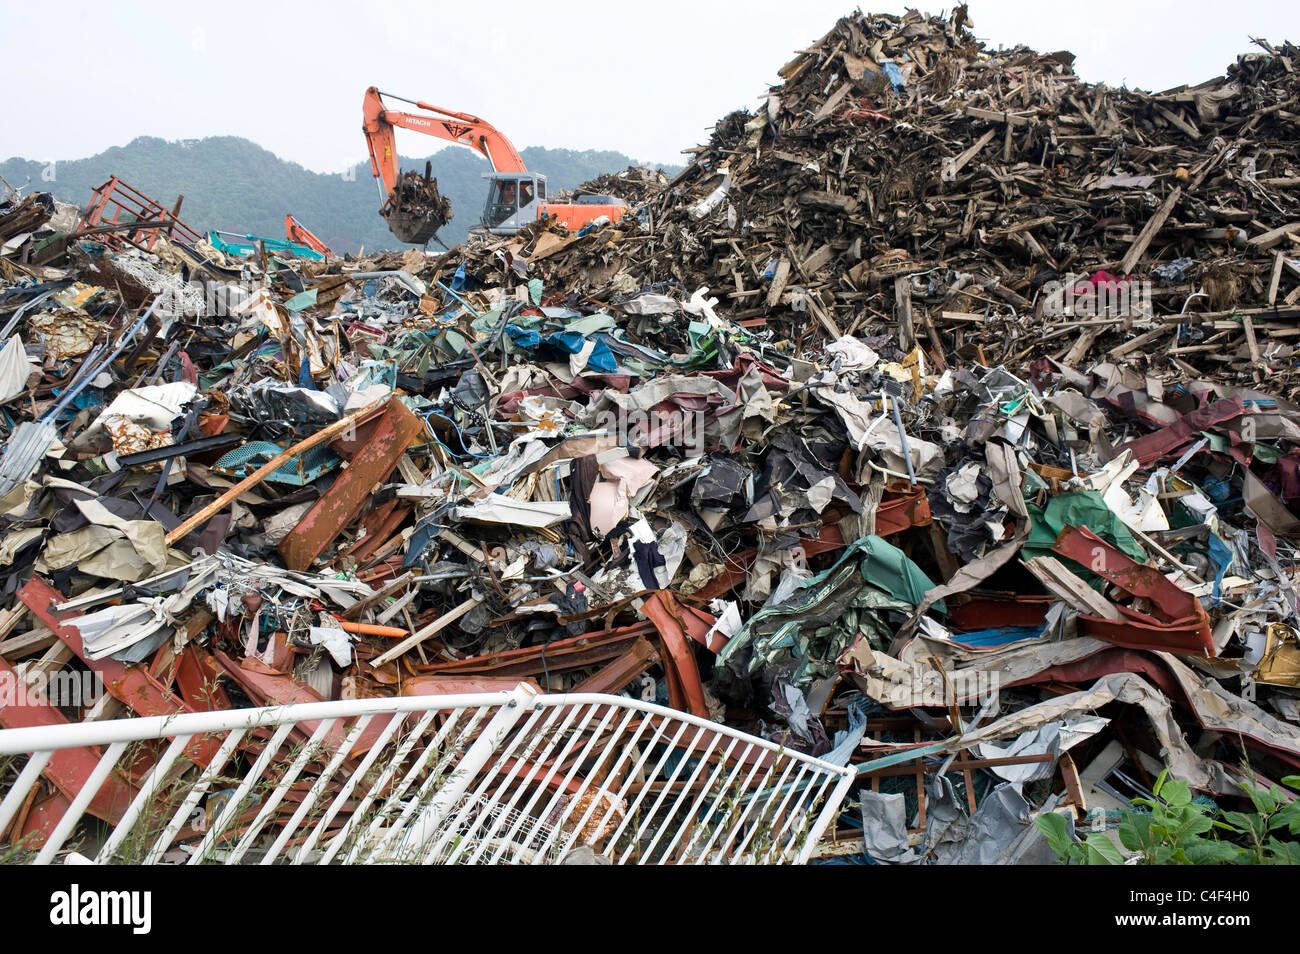 3  months after the magnitude 9 quake and tsunamis hit Japan, workers are still sifting through the debris in Otsuchi, Japan Stock Photo